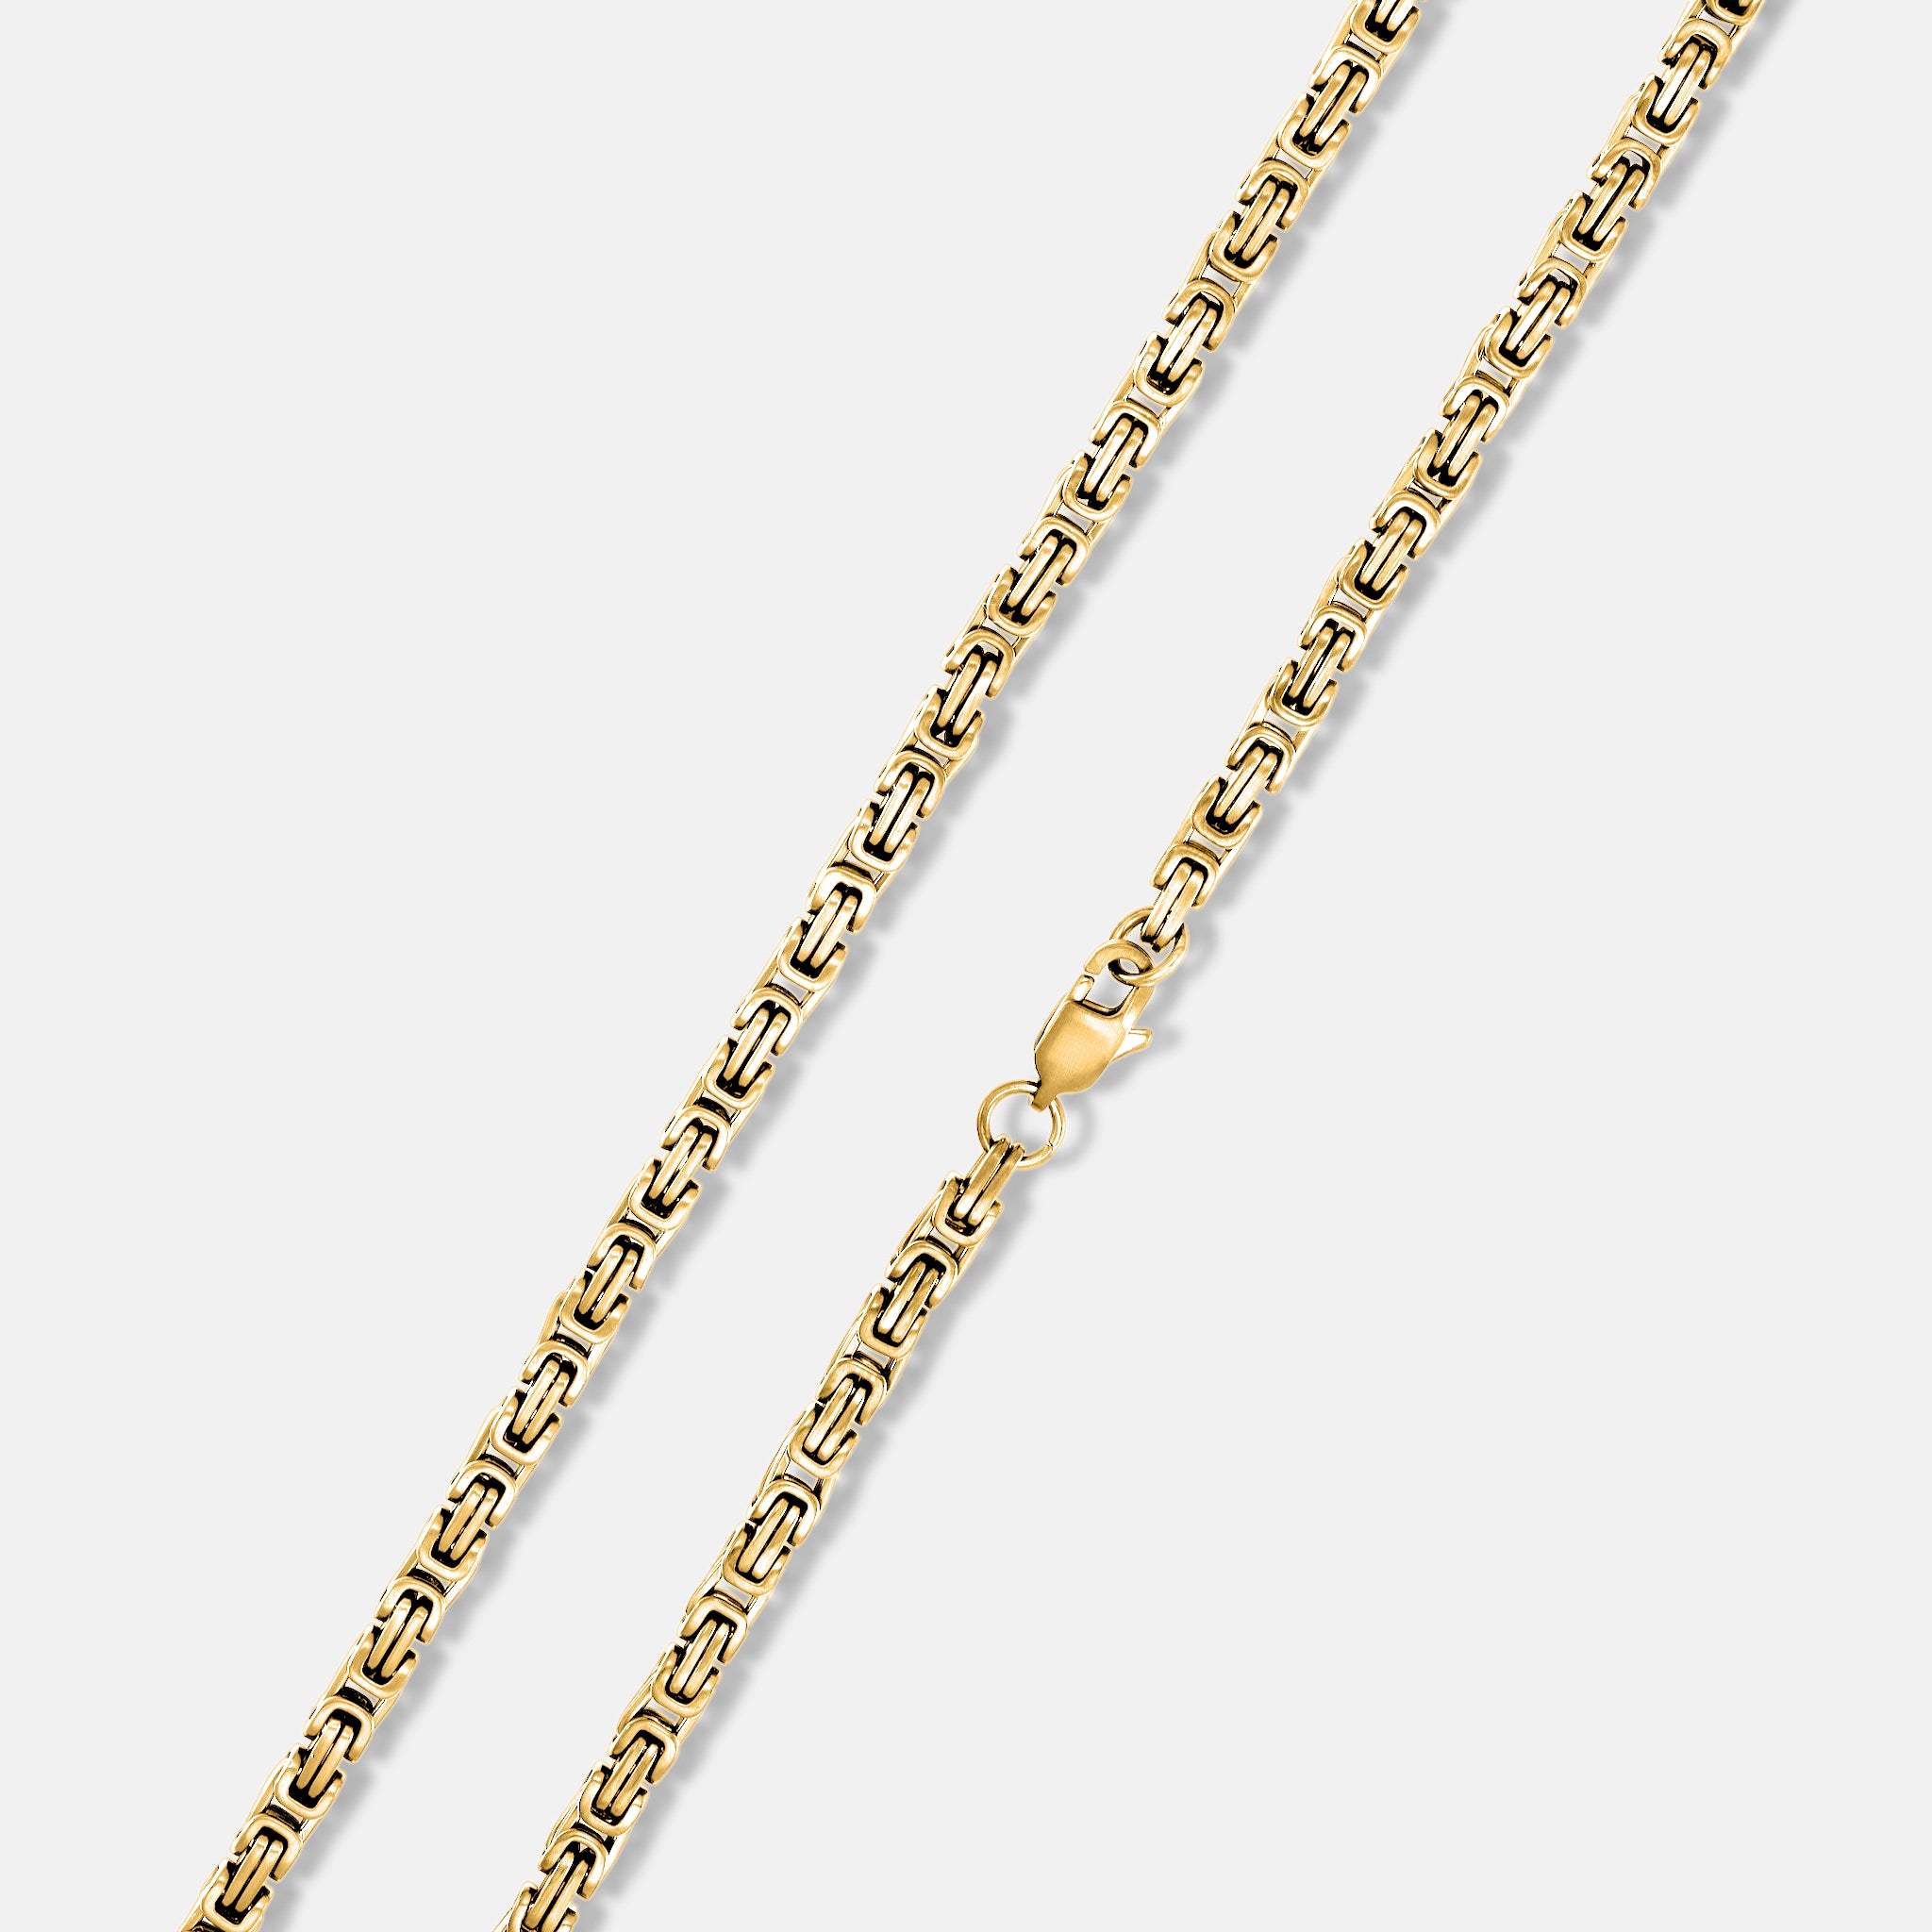 K12 - GOLD KING CHAIN - 4.2MM